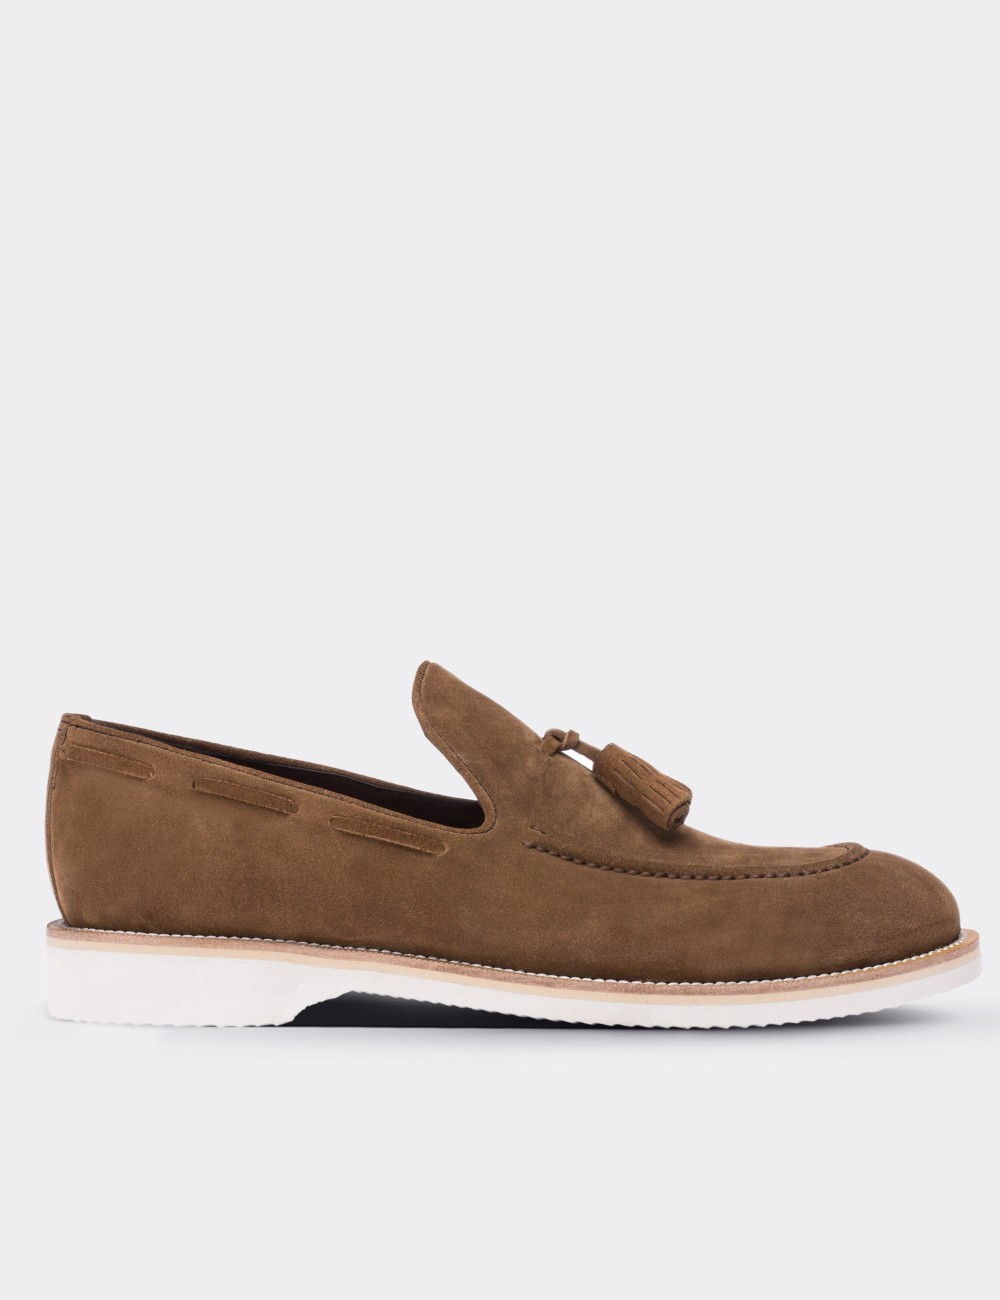 Tan Suede Leather Loafers - 01319MTBAE02